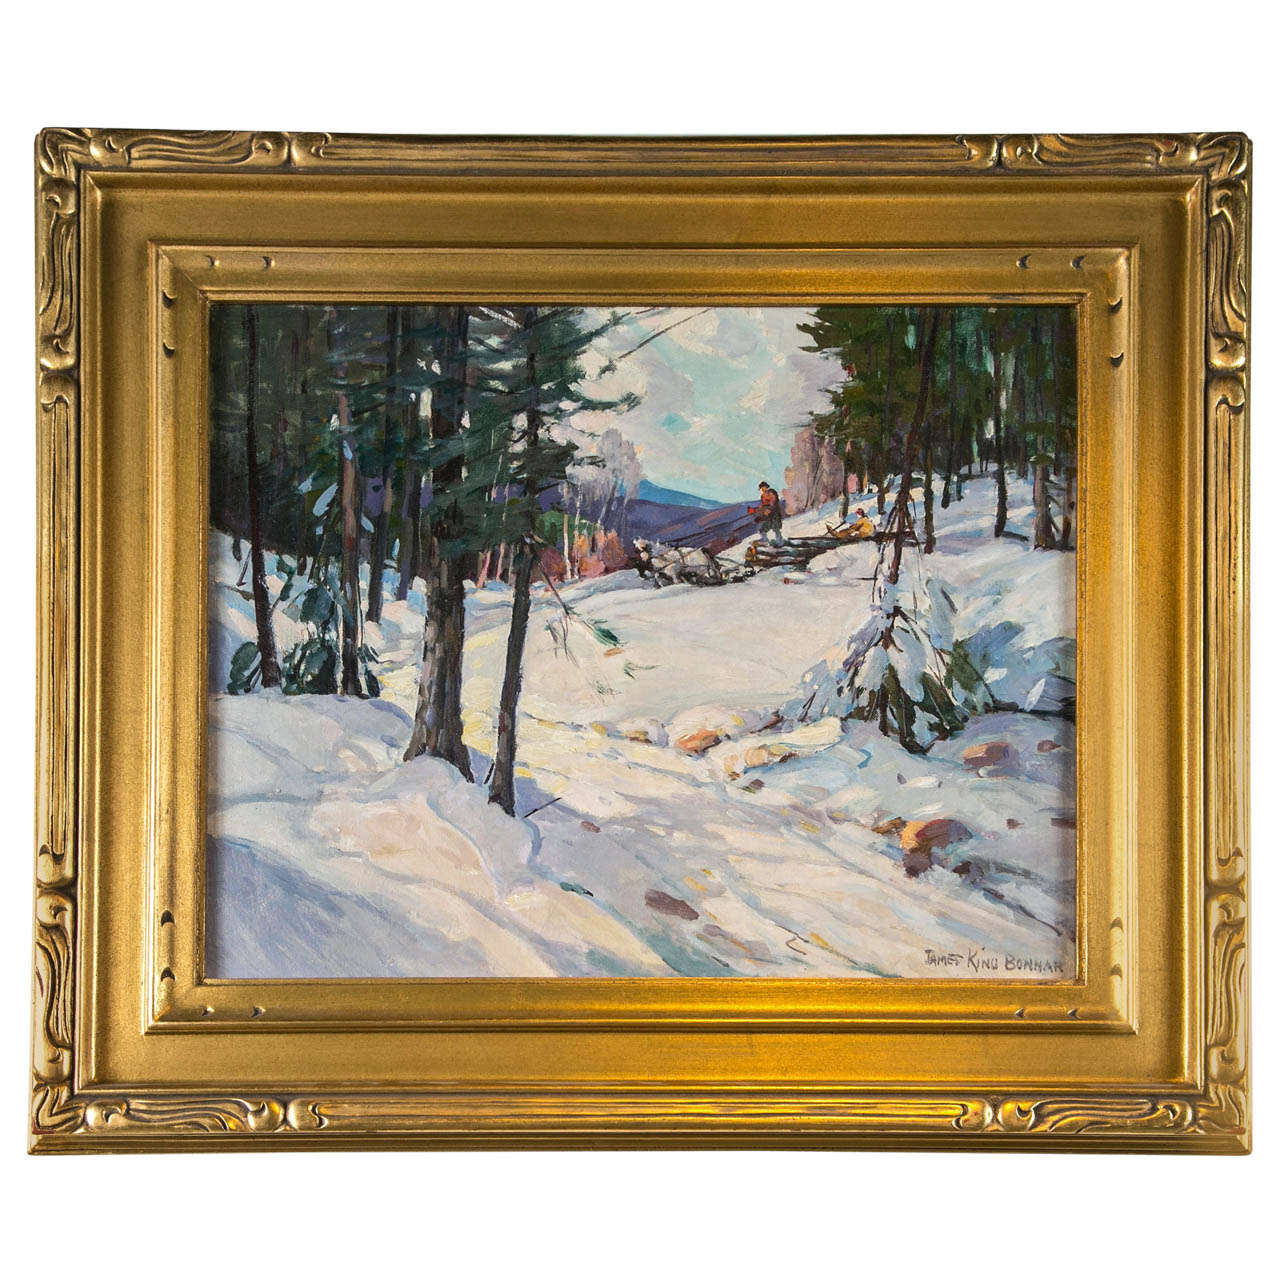 James King Bonnar "Hauling Logs on a Snowy Day" For Sale